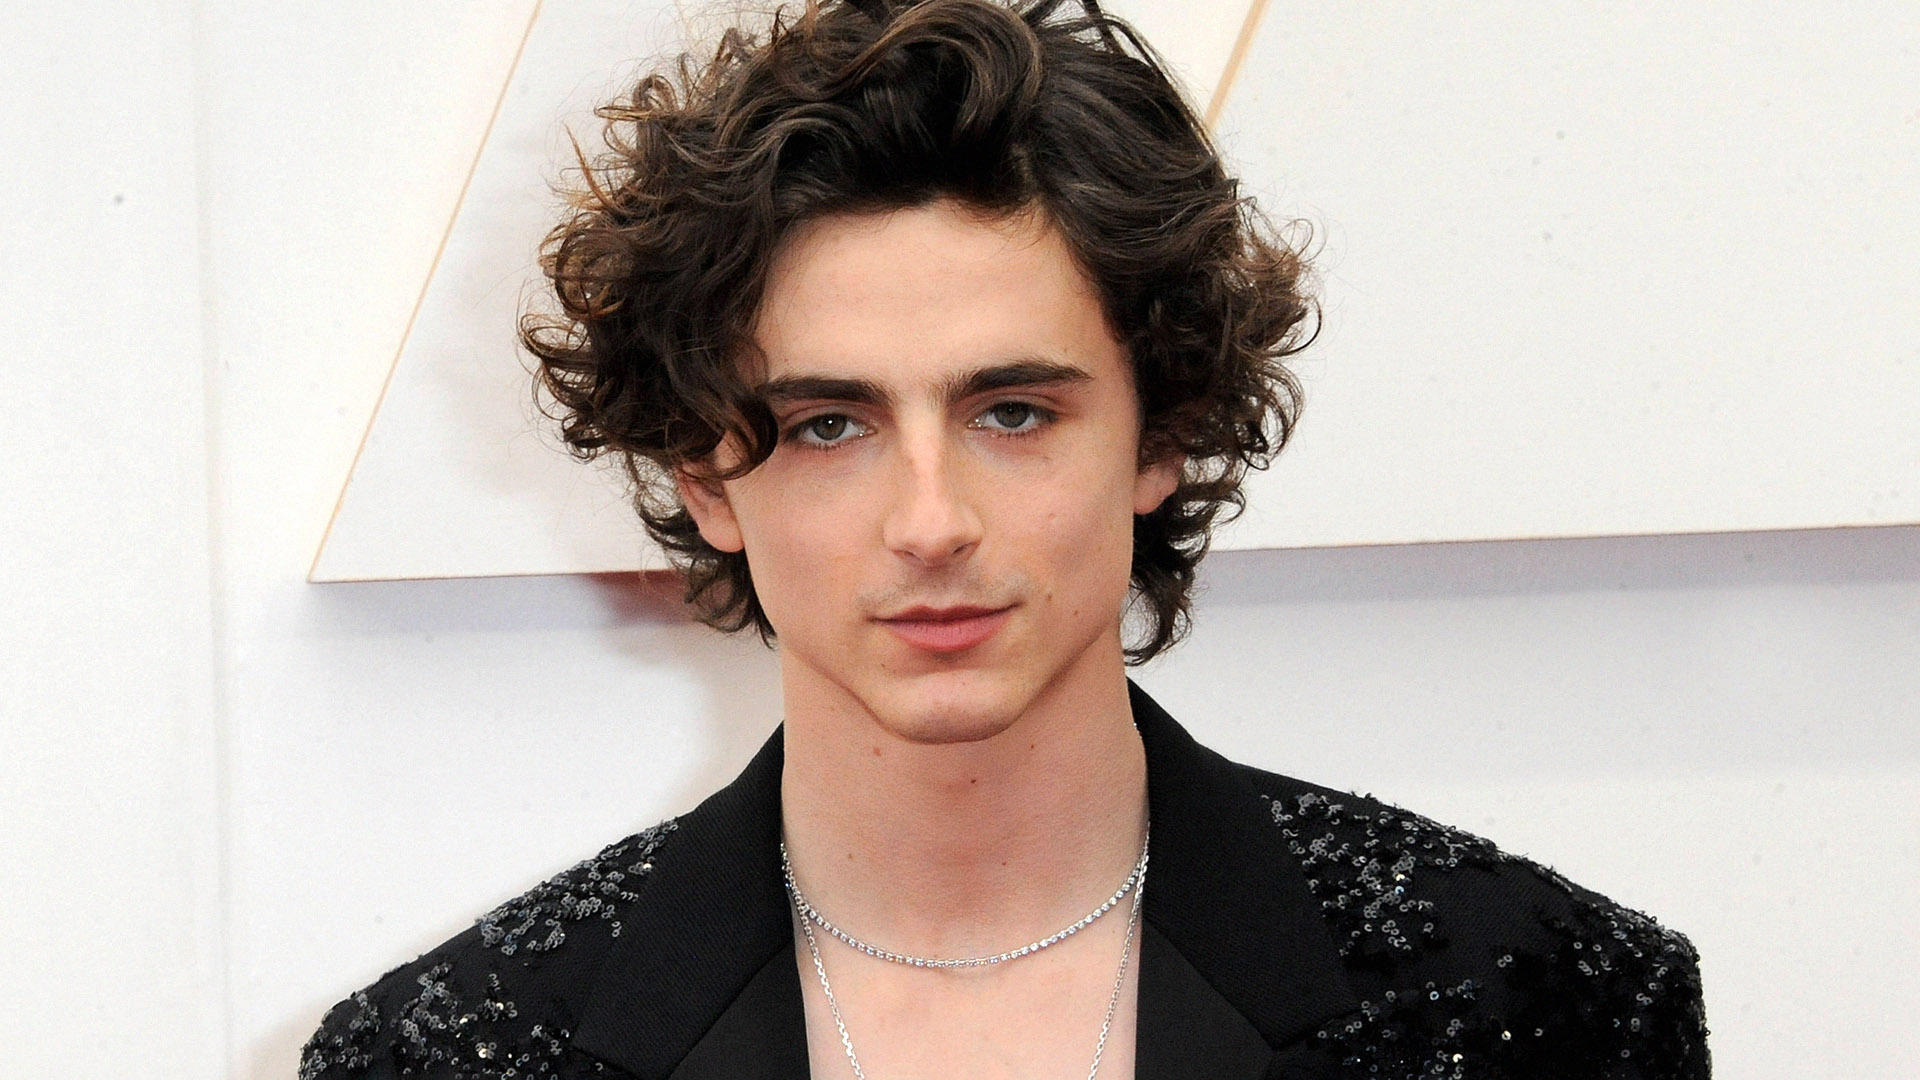 Who Are Timothée Chalamet's Famous Exes? 5 Celebrities He Dated